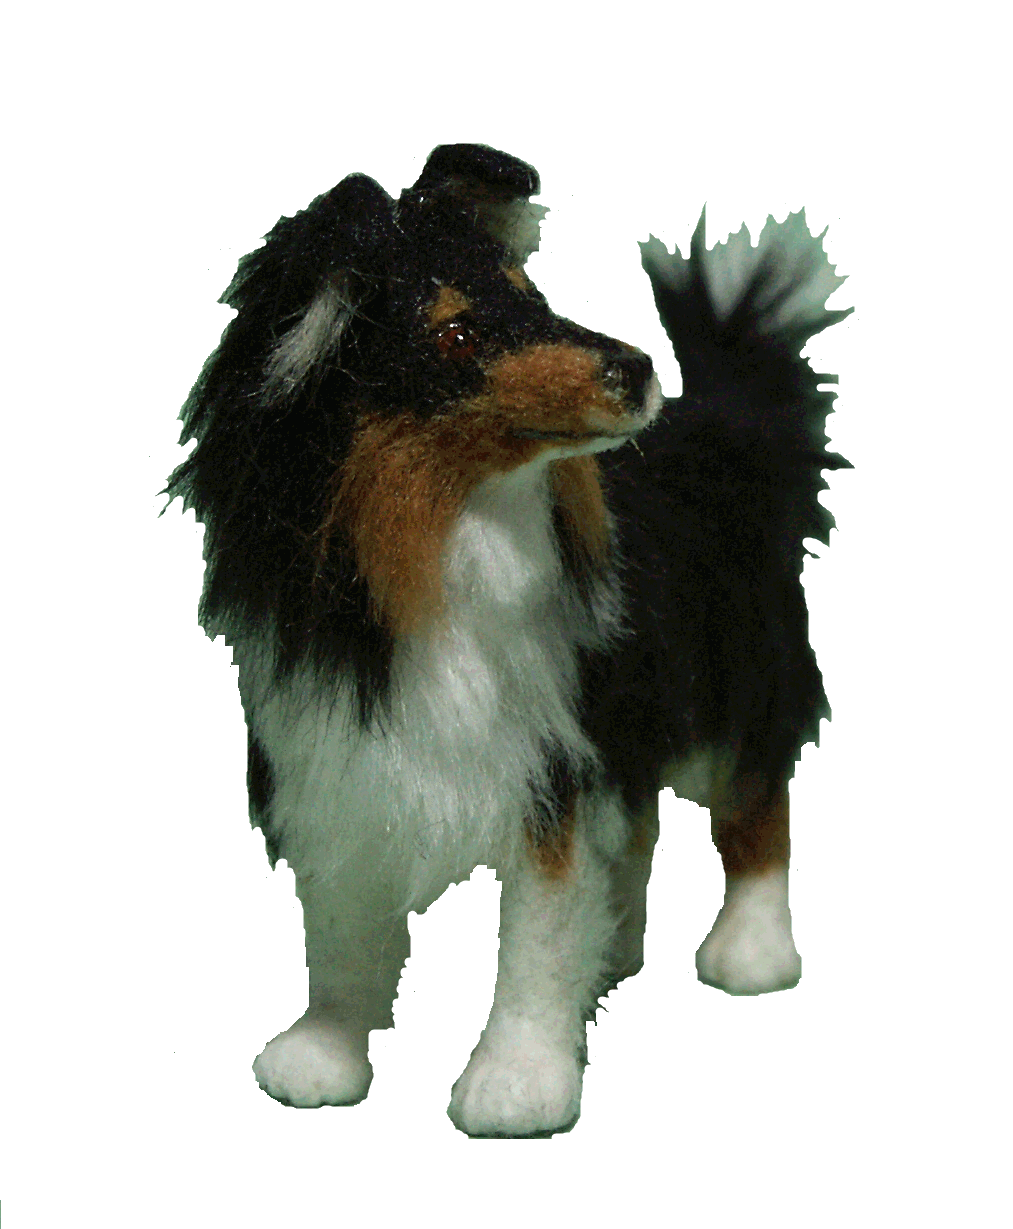 Lassie collie for the dolls house